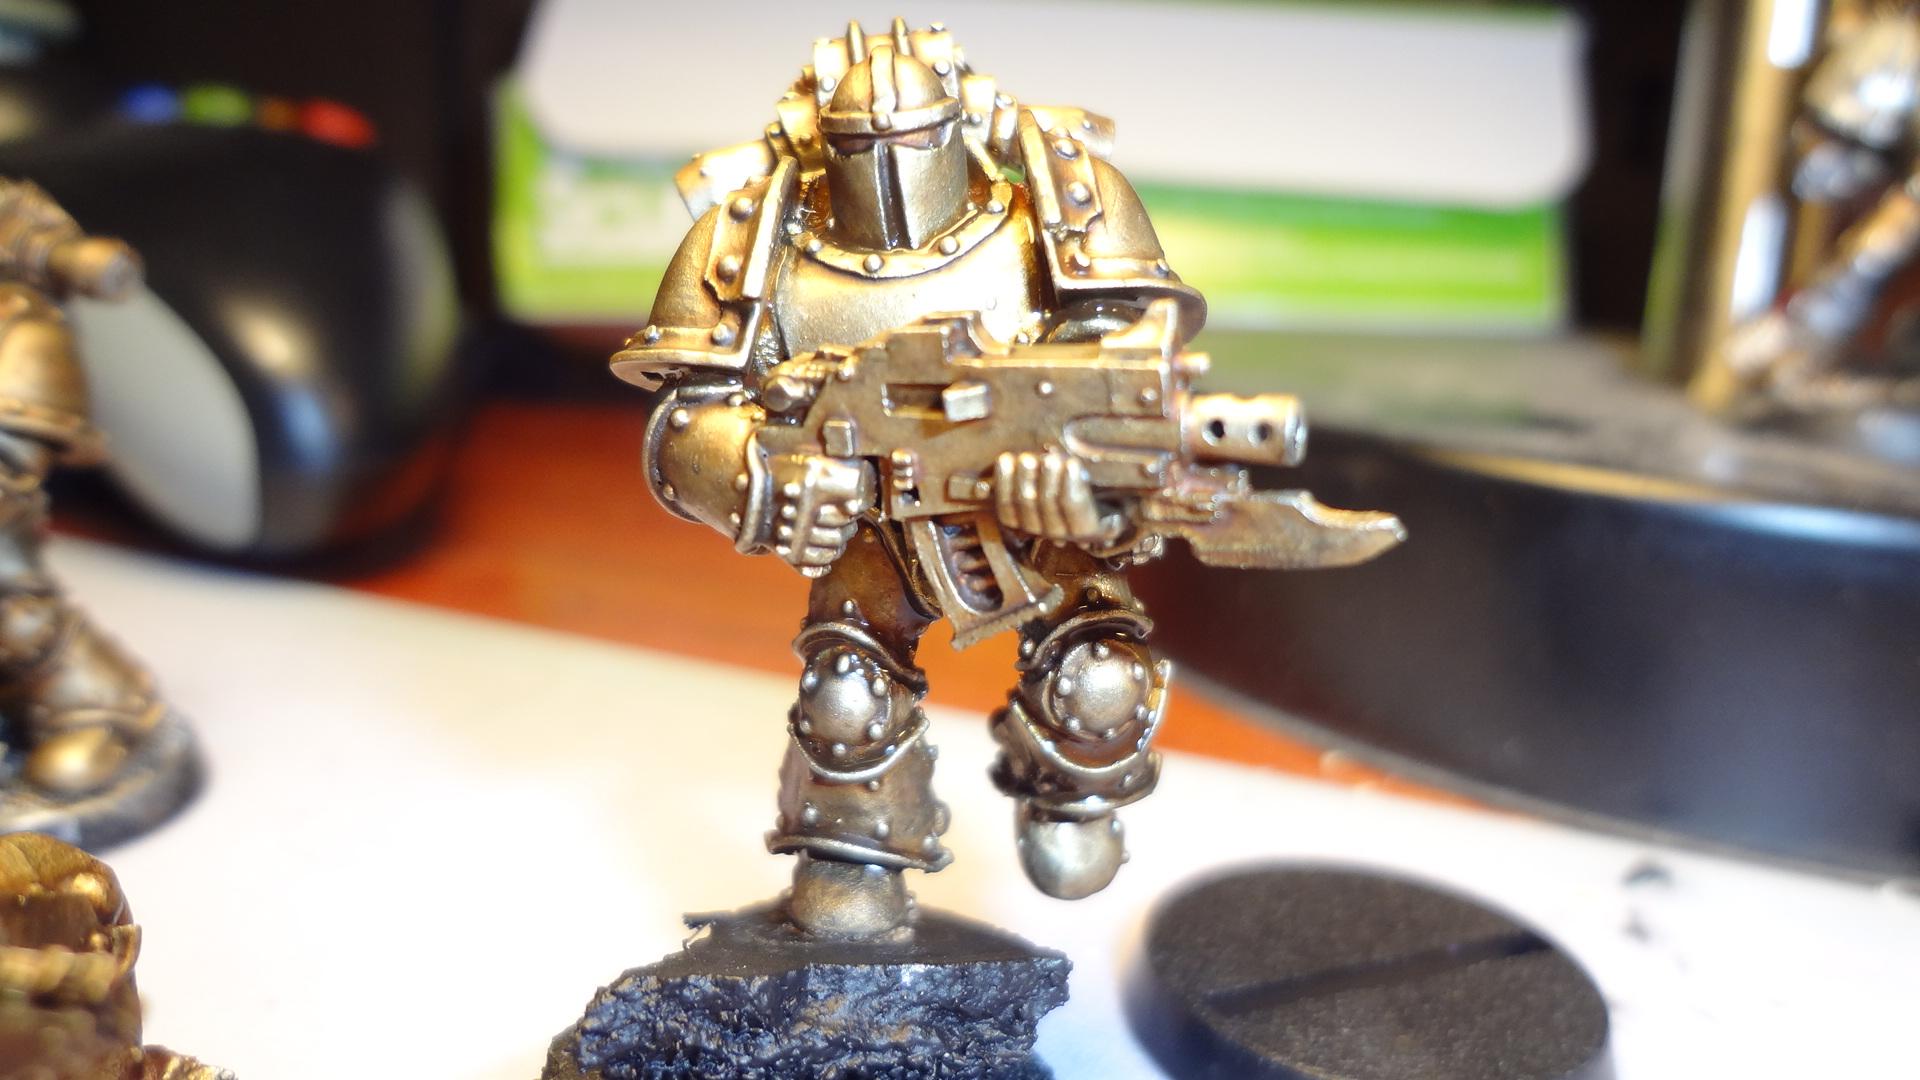 Another good pic of the contrast the armor makes in different lights - using this 'viva metallica' paint style allows for a variety of shades for the armor depending on the lighting